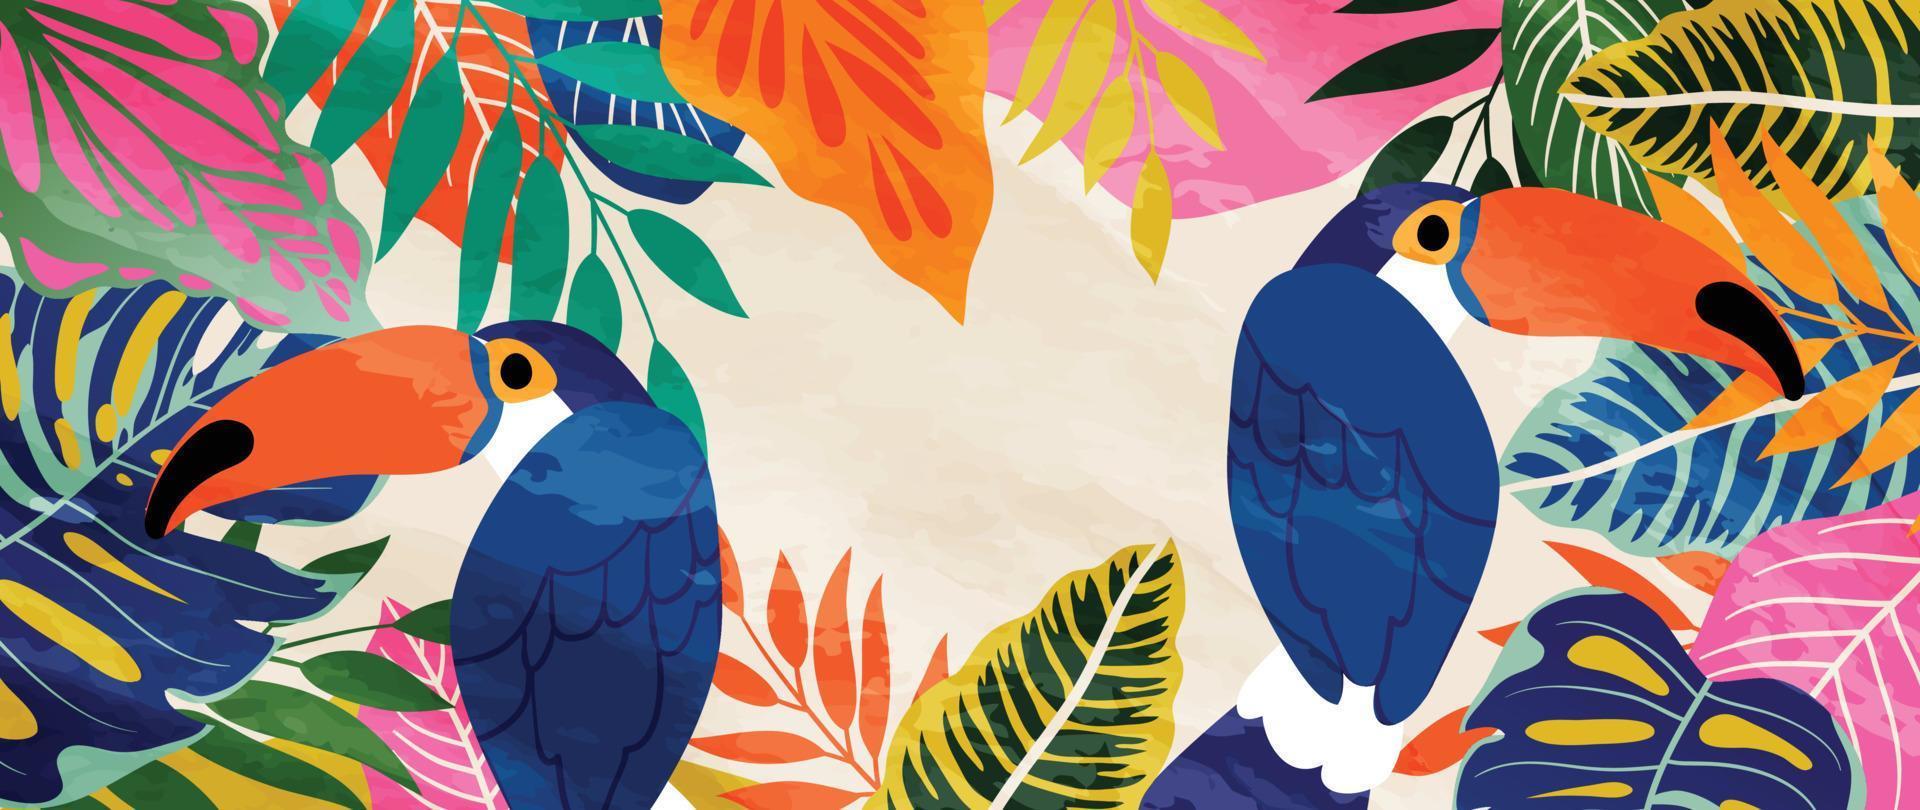 Colorful tropical background vector illustration. Jungle plants, palm leaves, exotic summertime style with hornbill bird and watercolor texture. Contemporary design for home decoration, wallpaper.